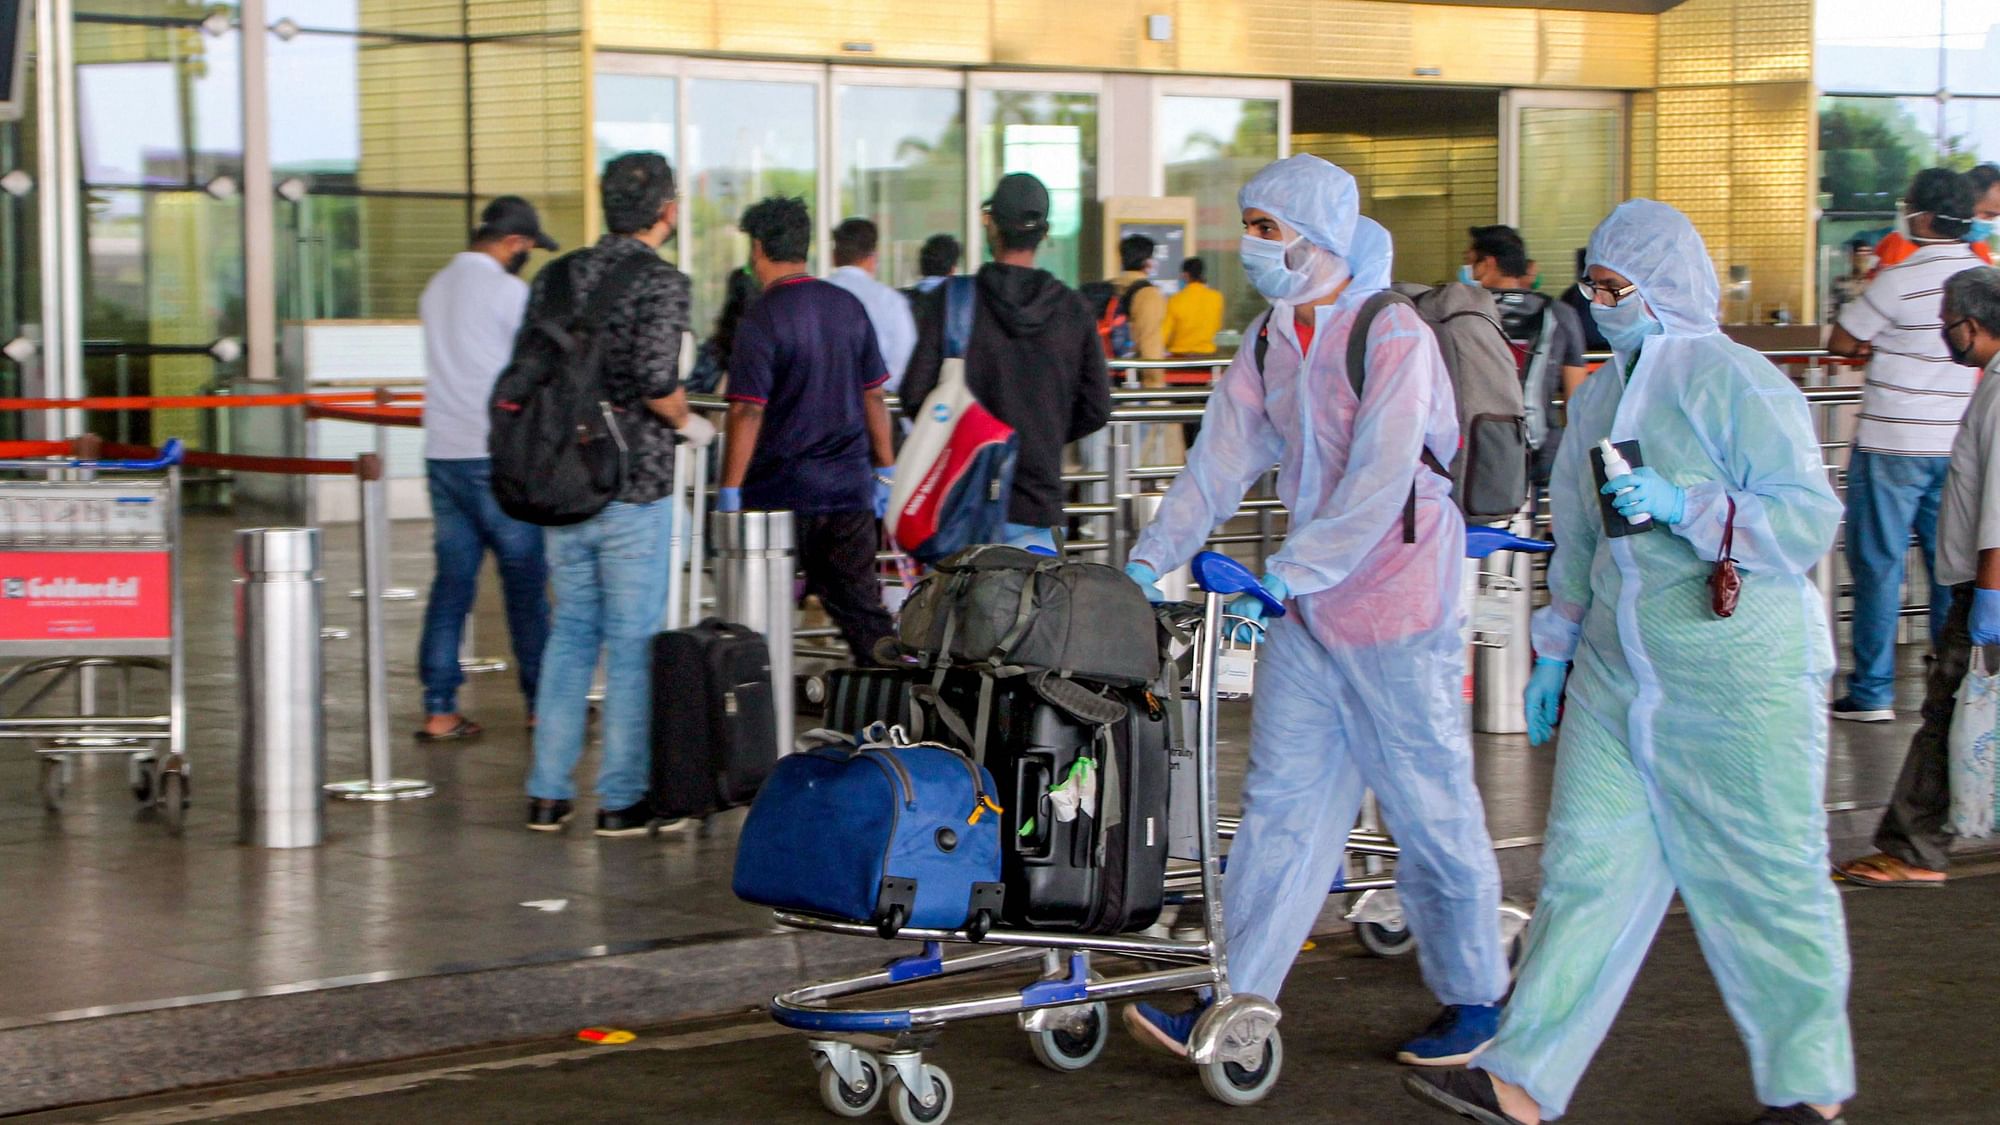 Passengers arrive to take a flight at the Shivaji Maharaj International Airport, during the ongoing COVID-19 nationwide lockdown, in Mumbai, Monday, 25 Dec. 